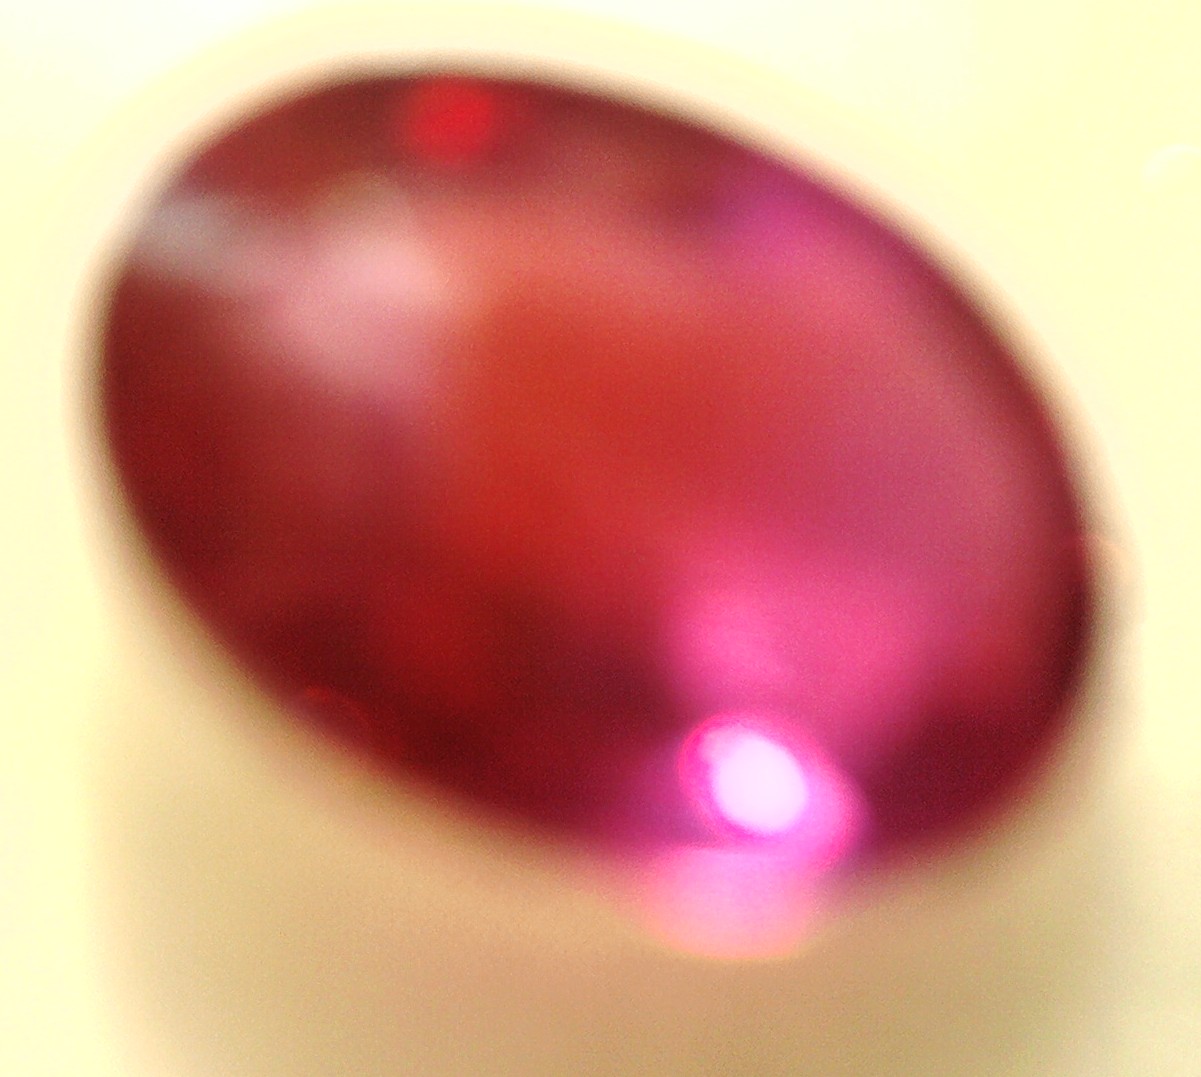 Pink Ruby Stone